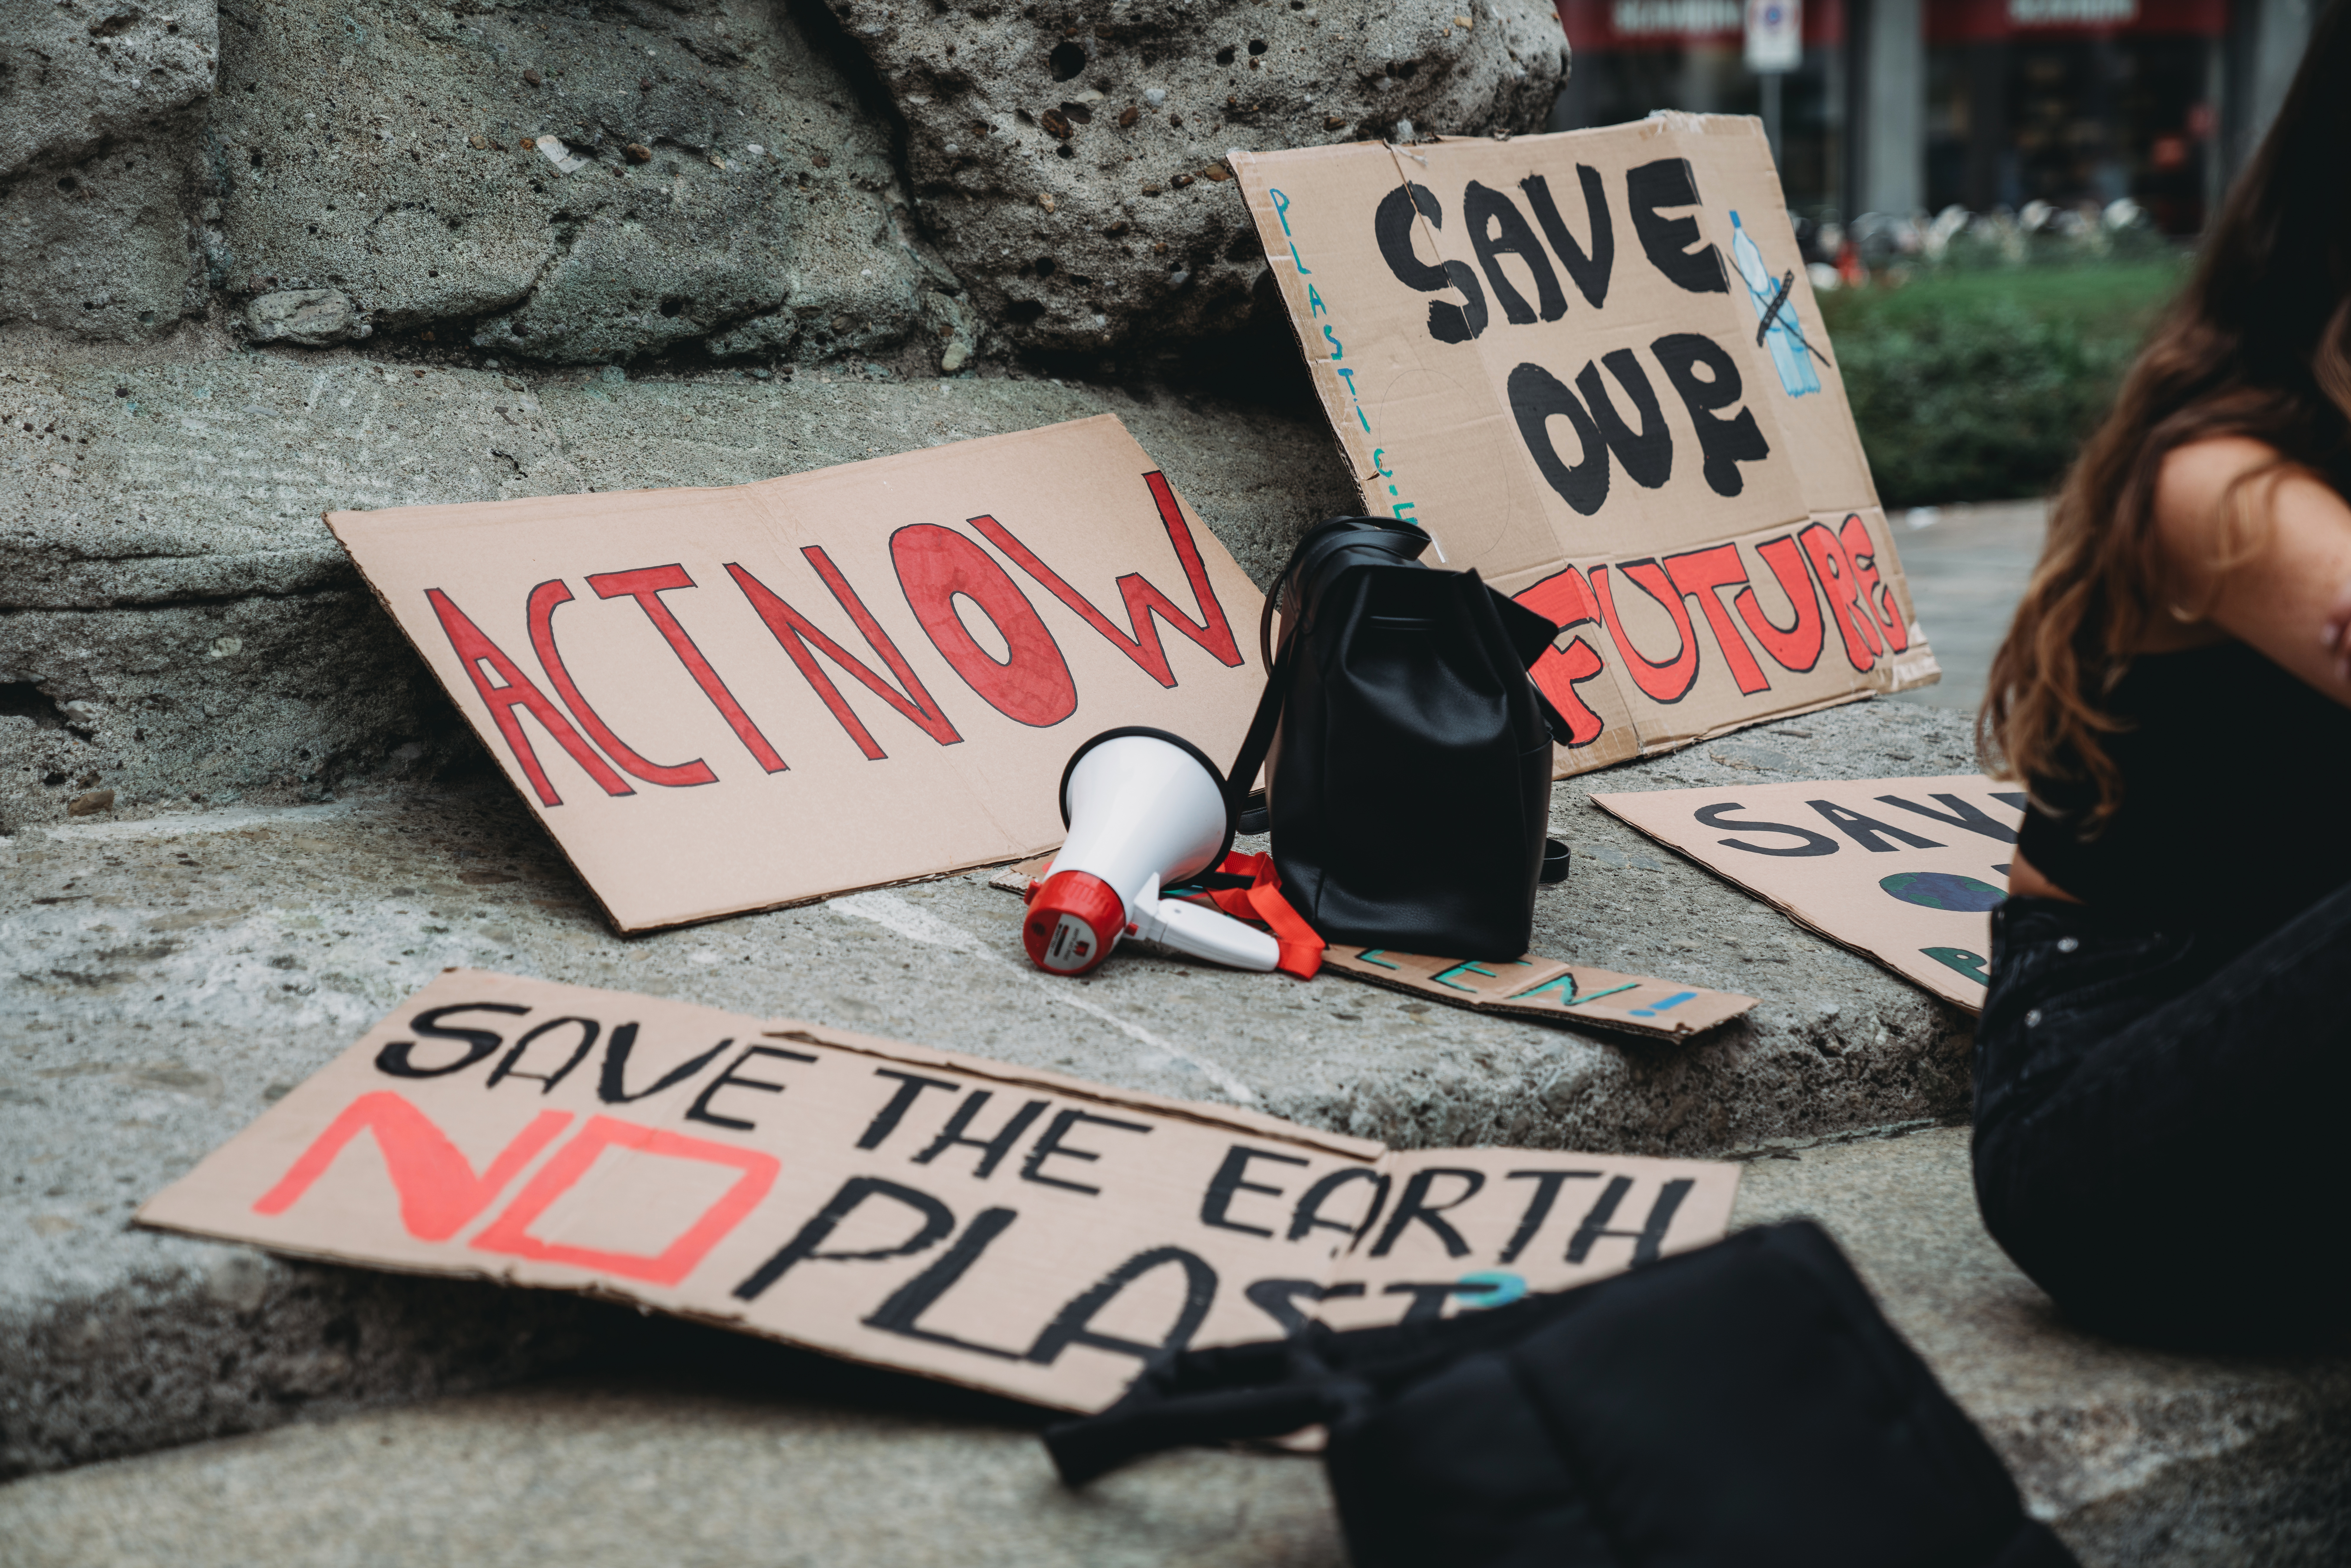 Climate protest signs “Act now” and “save our future” lying on the ground beside a megaphone.